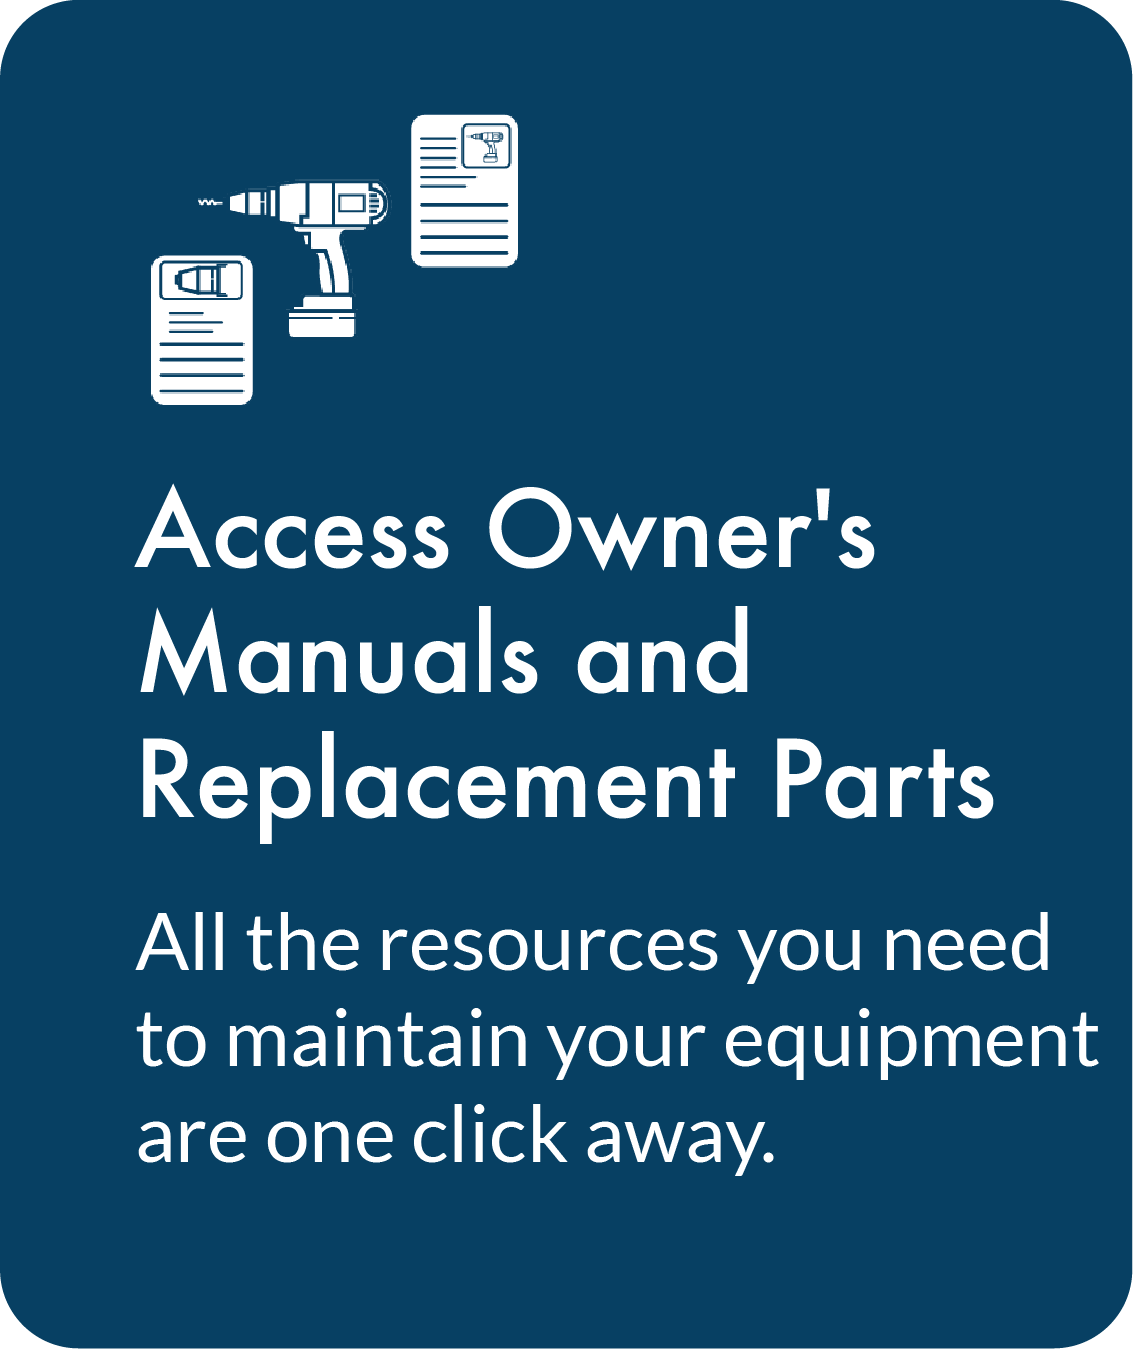 Access Owner's Manuals and Replacement Parts. All the resources you need to maintain your equipment are one click away.